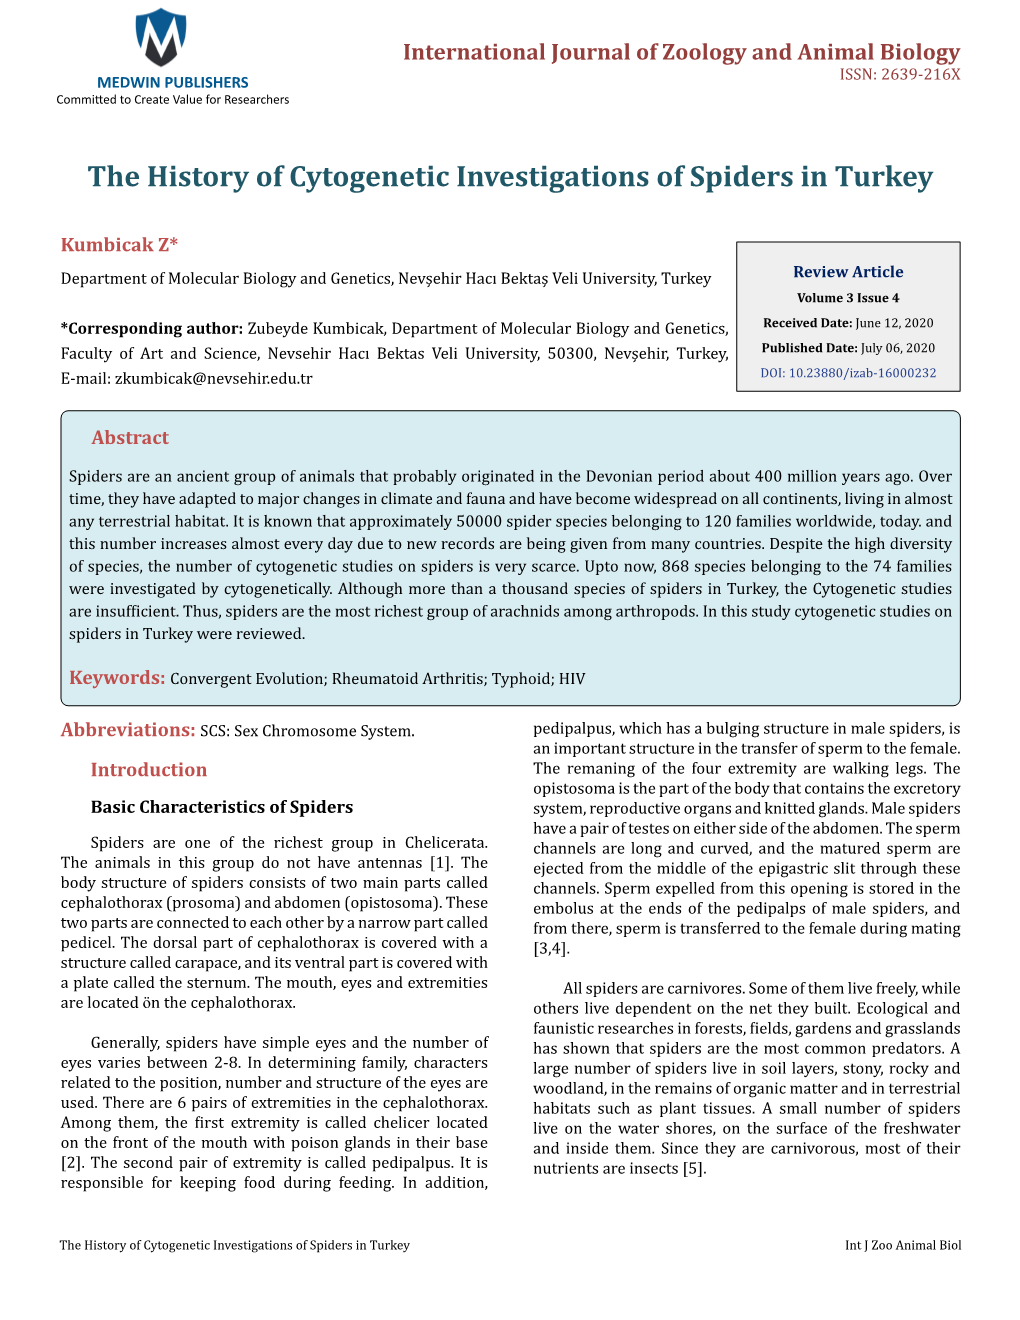 The History of Cytogenetic Investigations of Spiders in Turkey